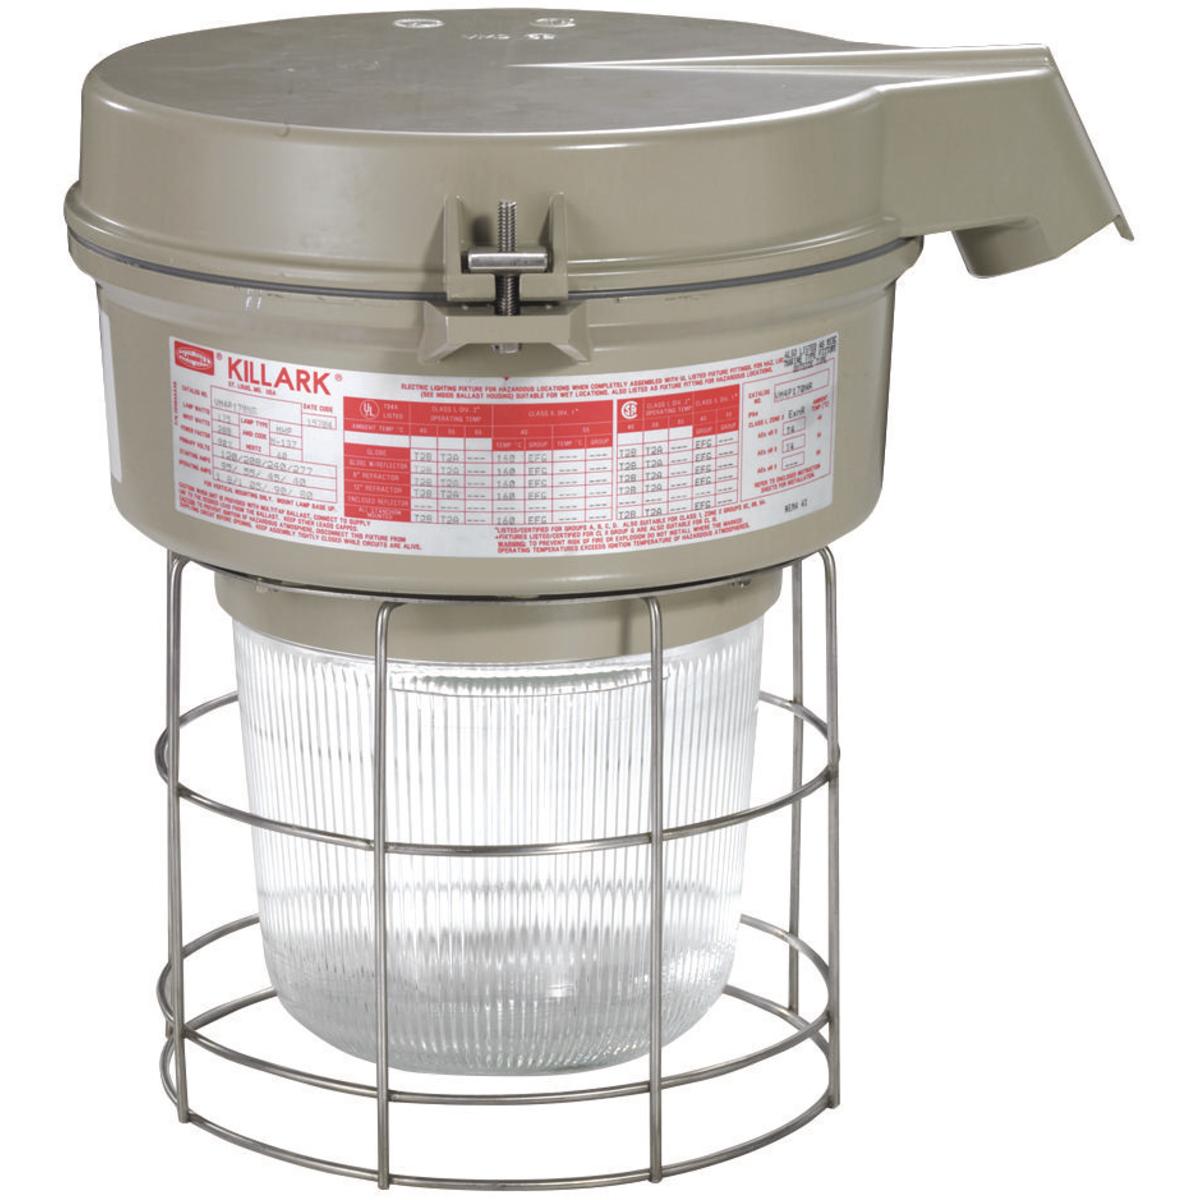 Hubbell VM4H100D5R5G VM4 Series - 100W Metal Halide Quadri-Volt - 1-1/2" Stanchion 25° - Type V Glass Refractor and Guard  ; Ballast tank and splice box – corrosion resistant copper-free aluminum alloy with baked powder epoxy/polyester finish, electrostatically applied for co